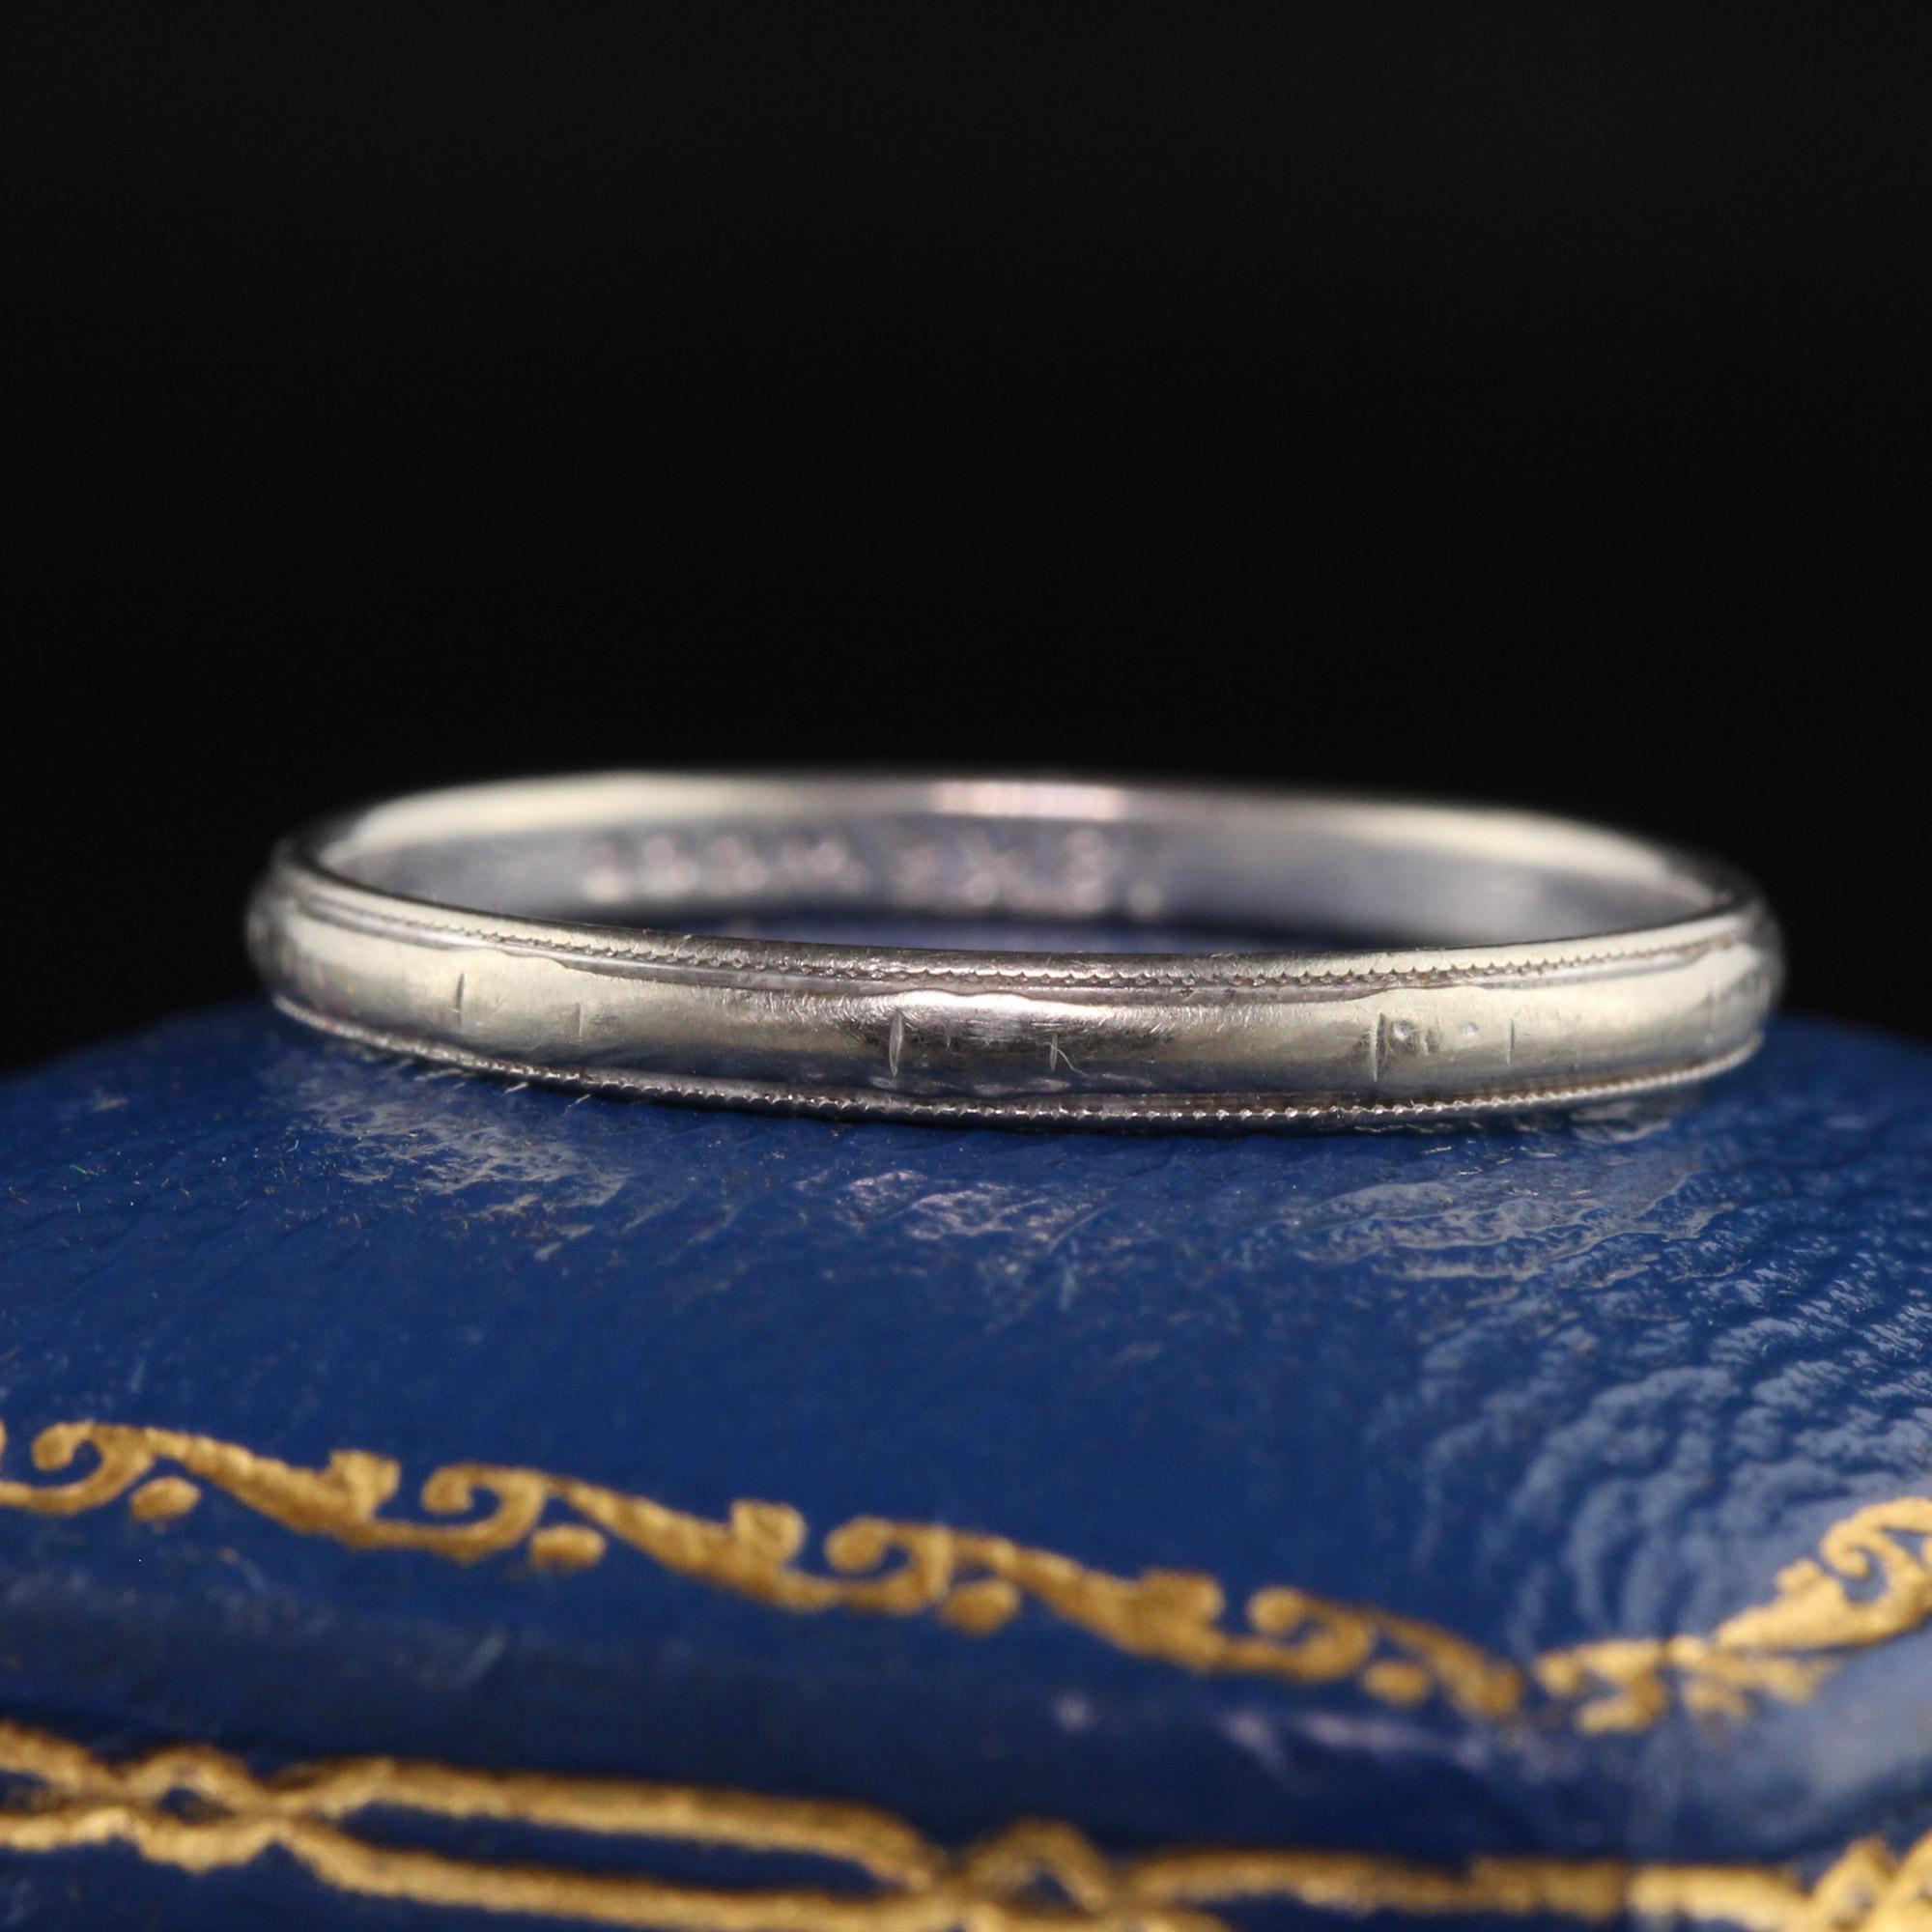 Beautiful Antique Art Deco 18K White Gold Wood Engraved Wedding Band - Size 6 1/2. This beautiful ring is crafted in 18k white gold. This band has engravings going around the entire ring and has the makers mark Wood inside the band.

Item